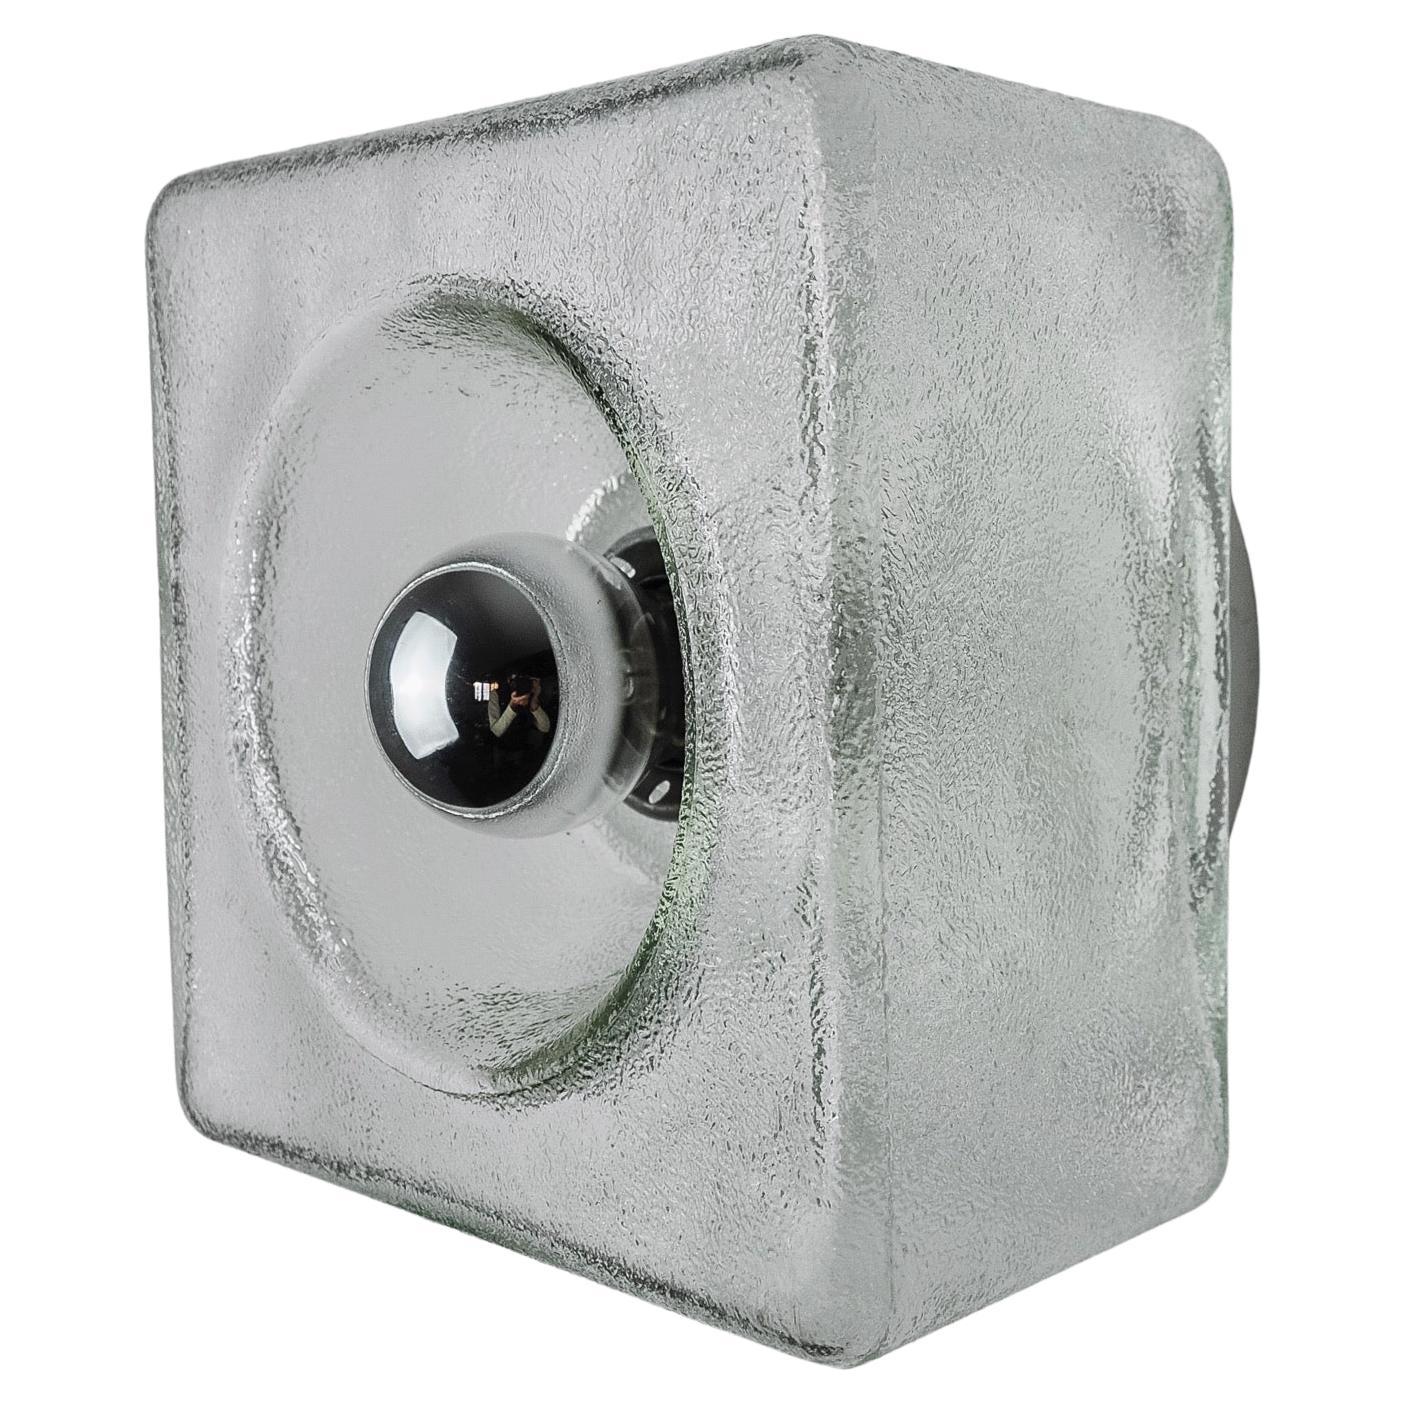 Frosted cubic wall lamp, murano glass, italy, 1970